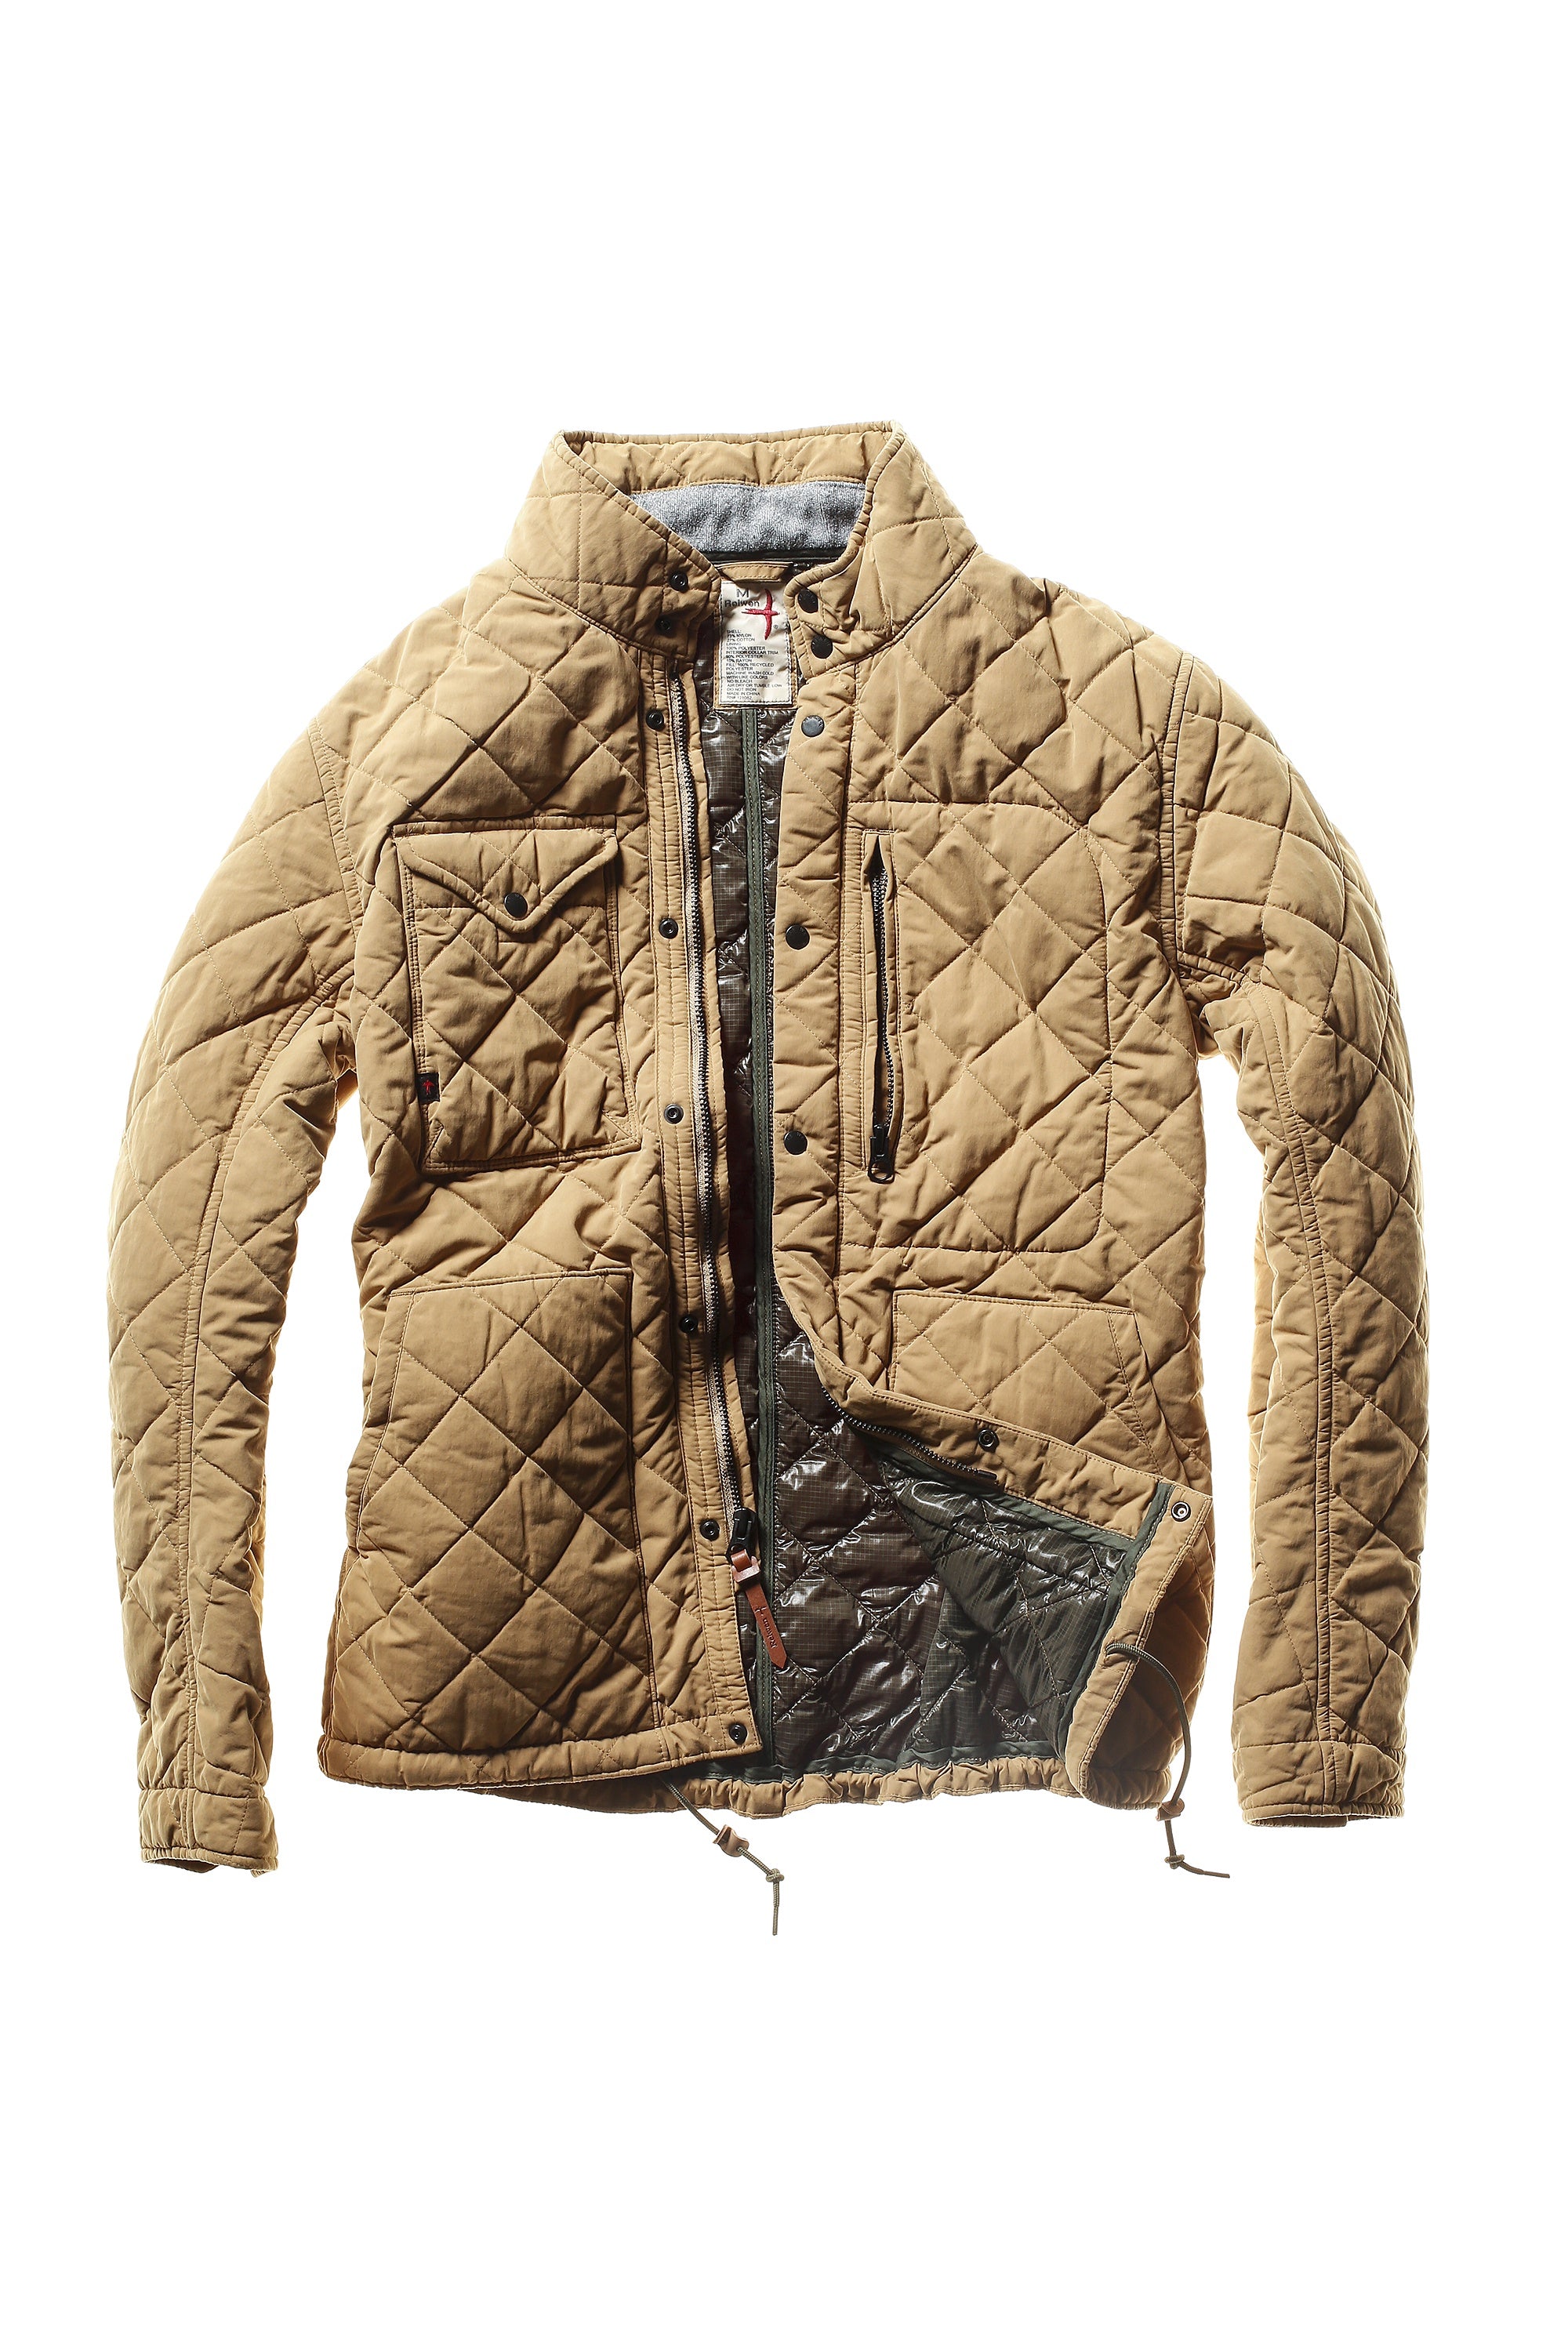 Relwen Quilted Tanker Jacket – Seattle Thread Company